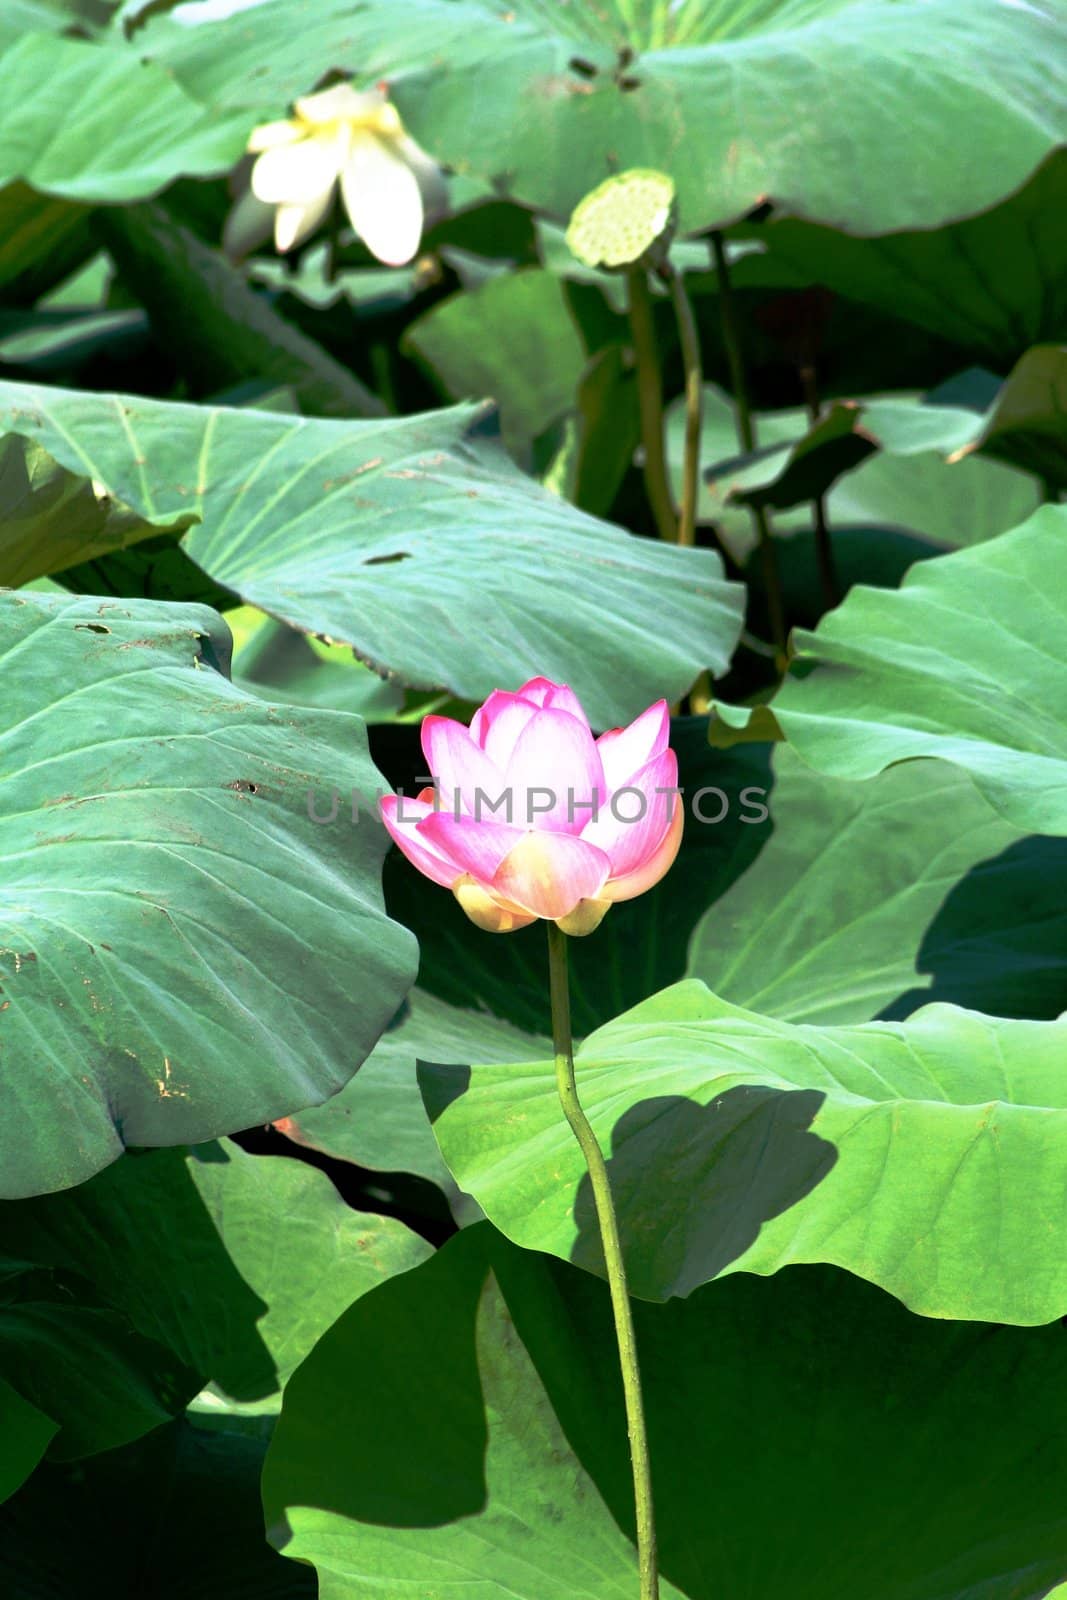 Lotus and leaves by adrianocastelli